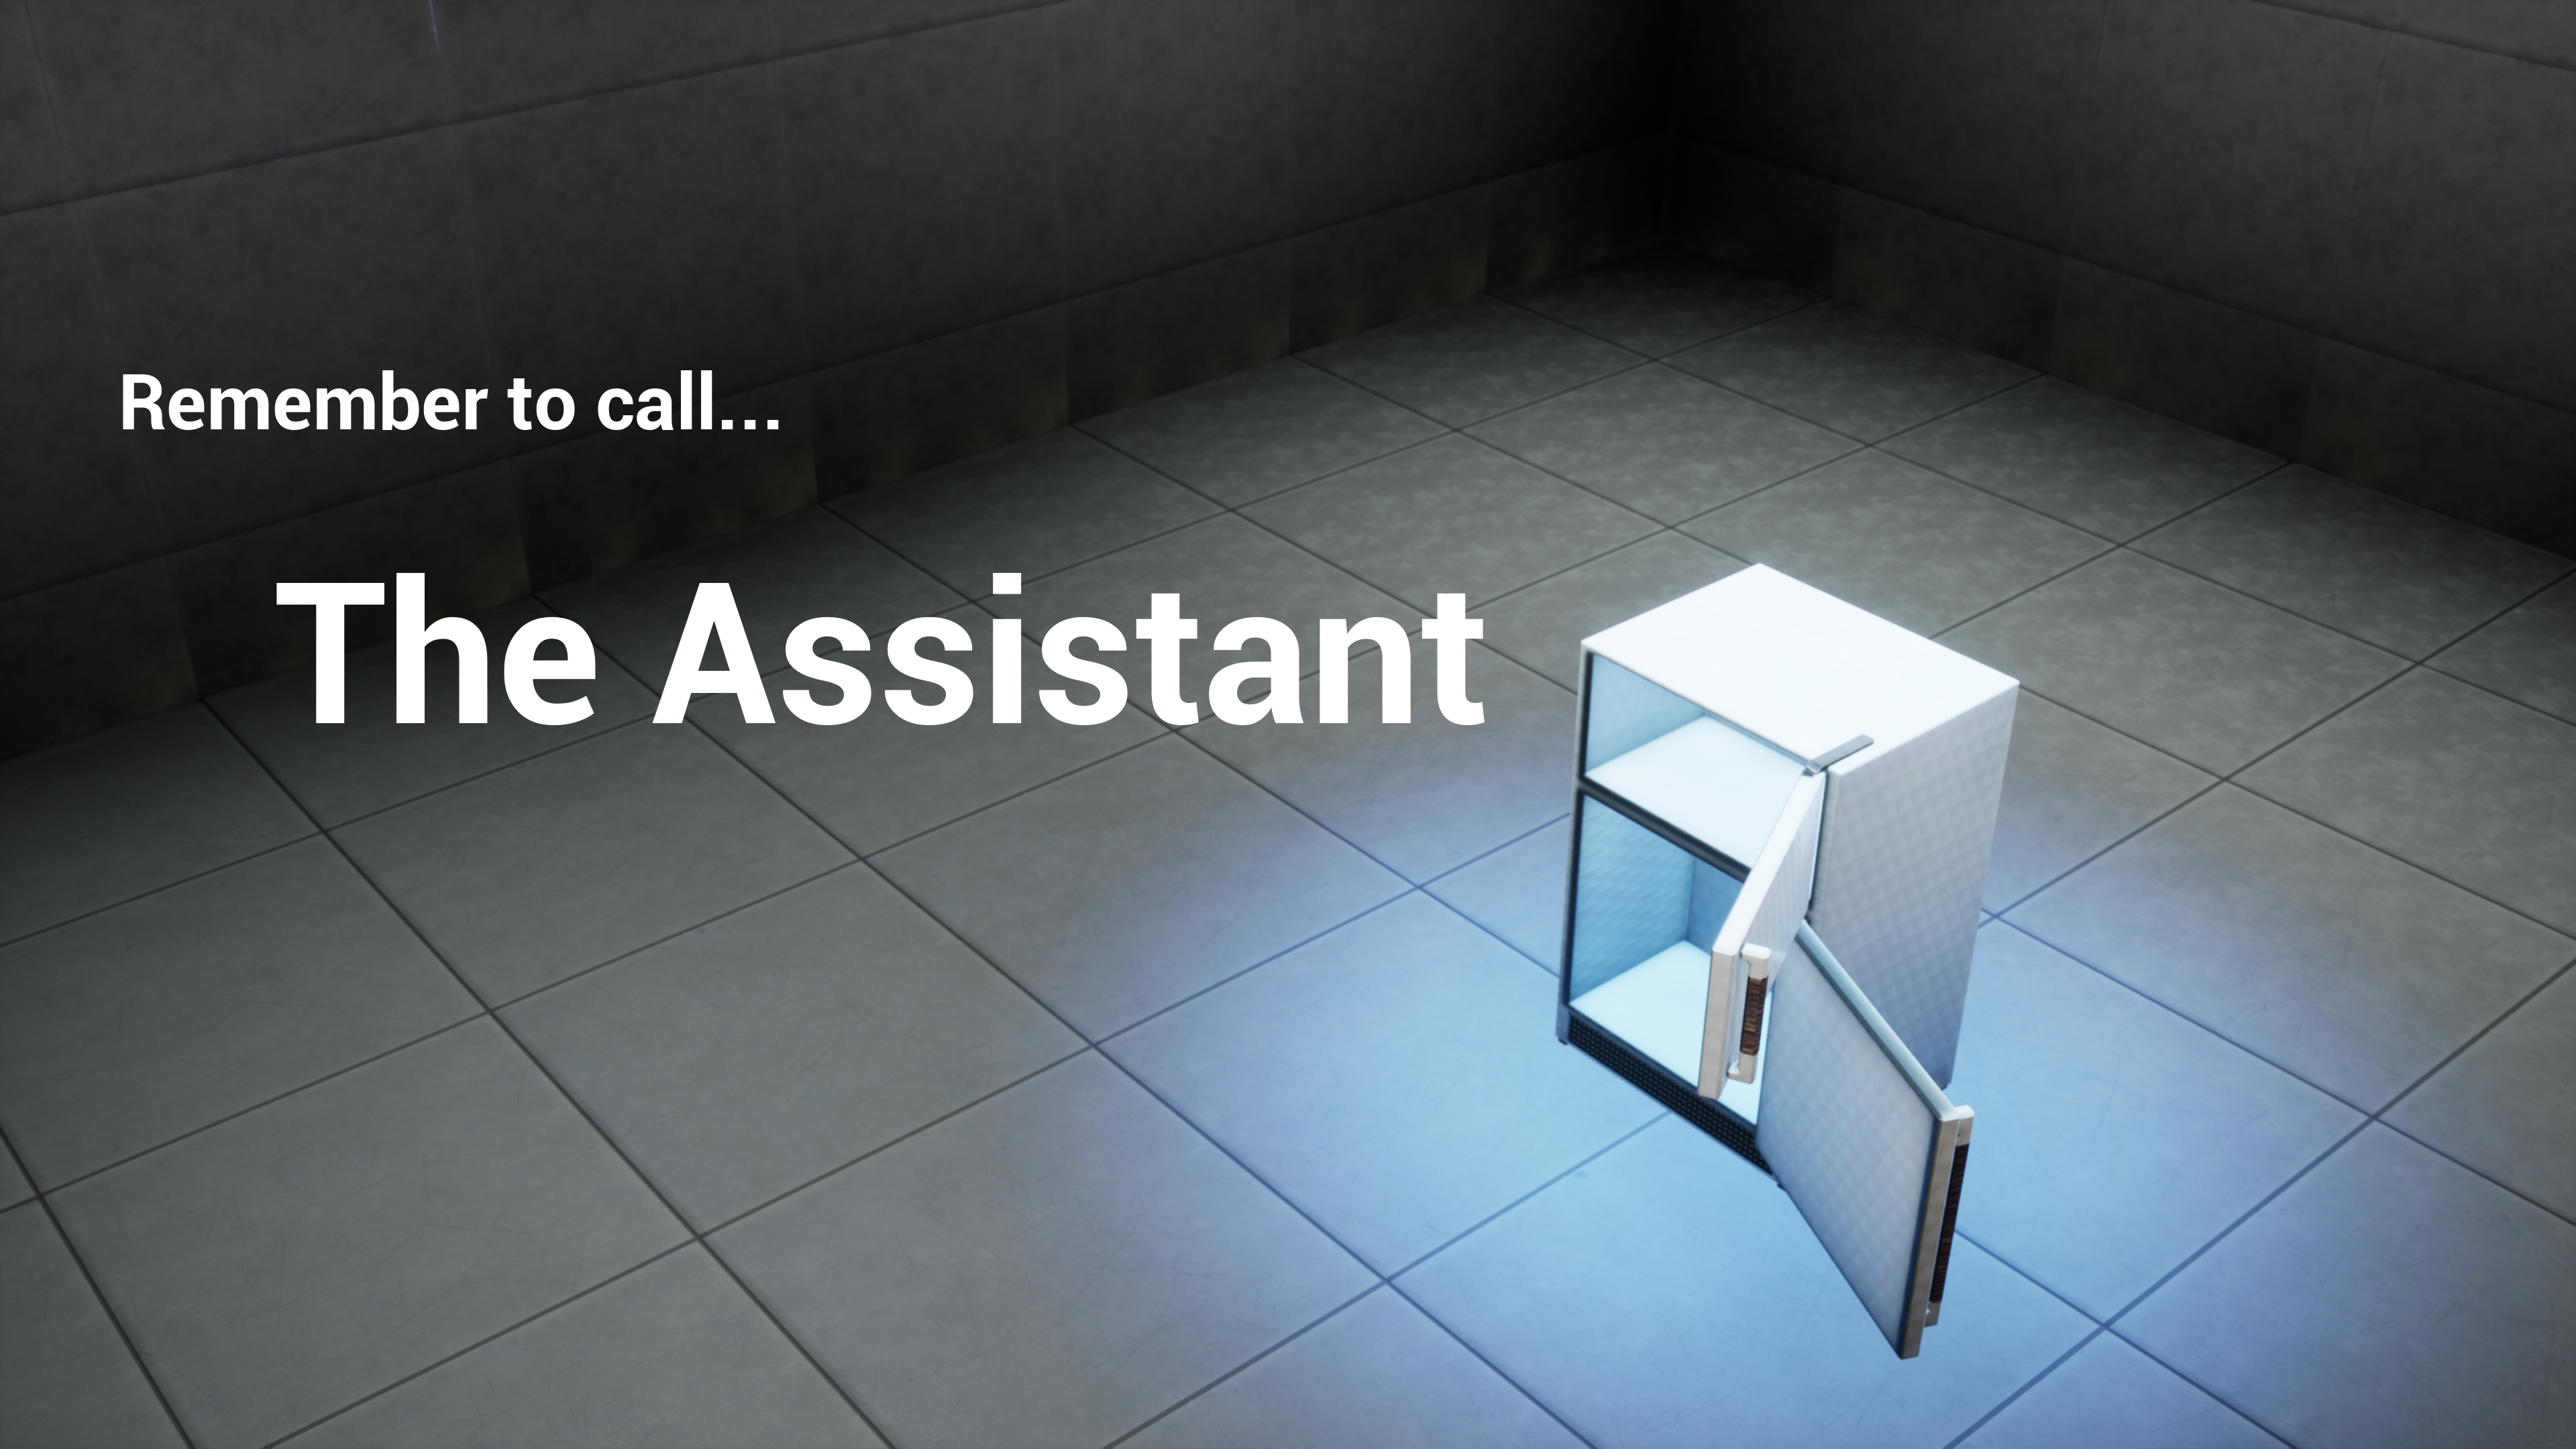 Global Game Jam 2020: The Assistant